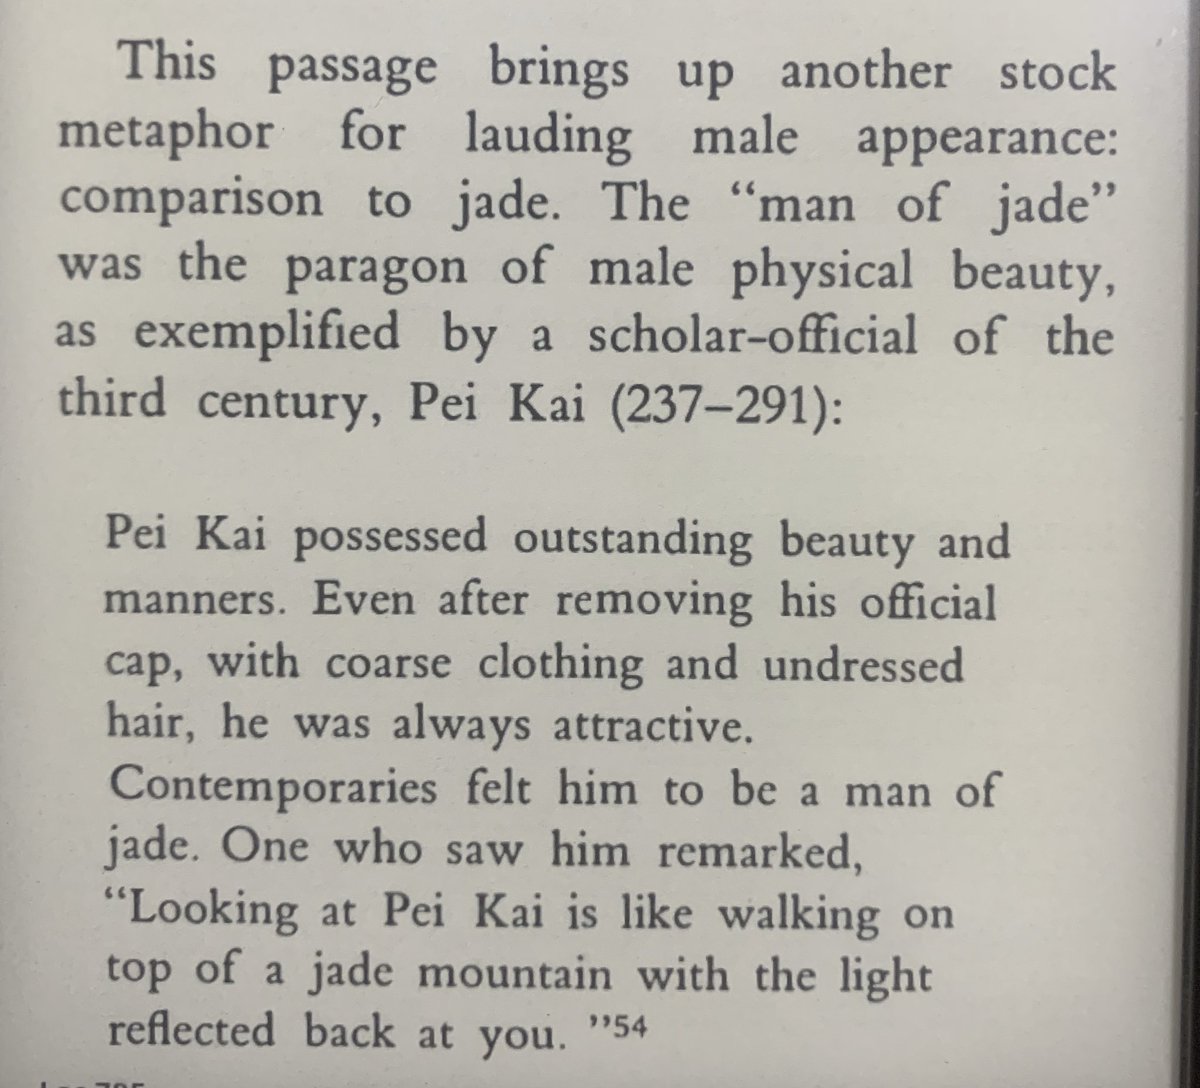 It’s been a few thousand years and we’re still using the jade metaphor, which tickles me I mean, I know it’s historical fiction, but it’s not like English historical fiction actually sounds like history texts, right?!